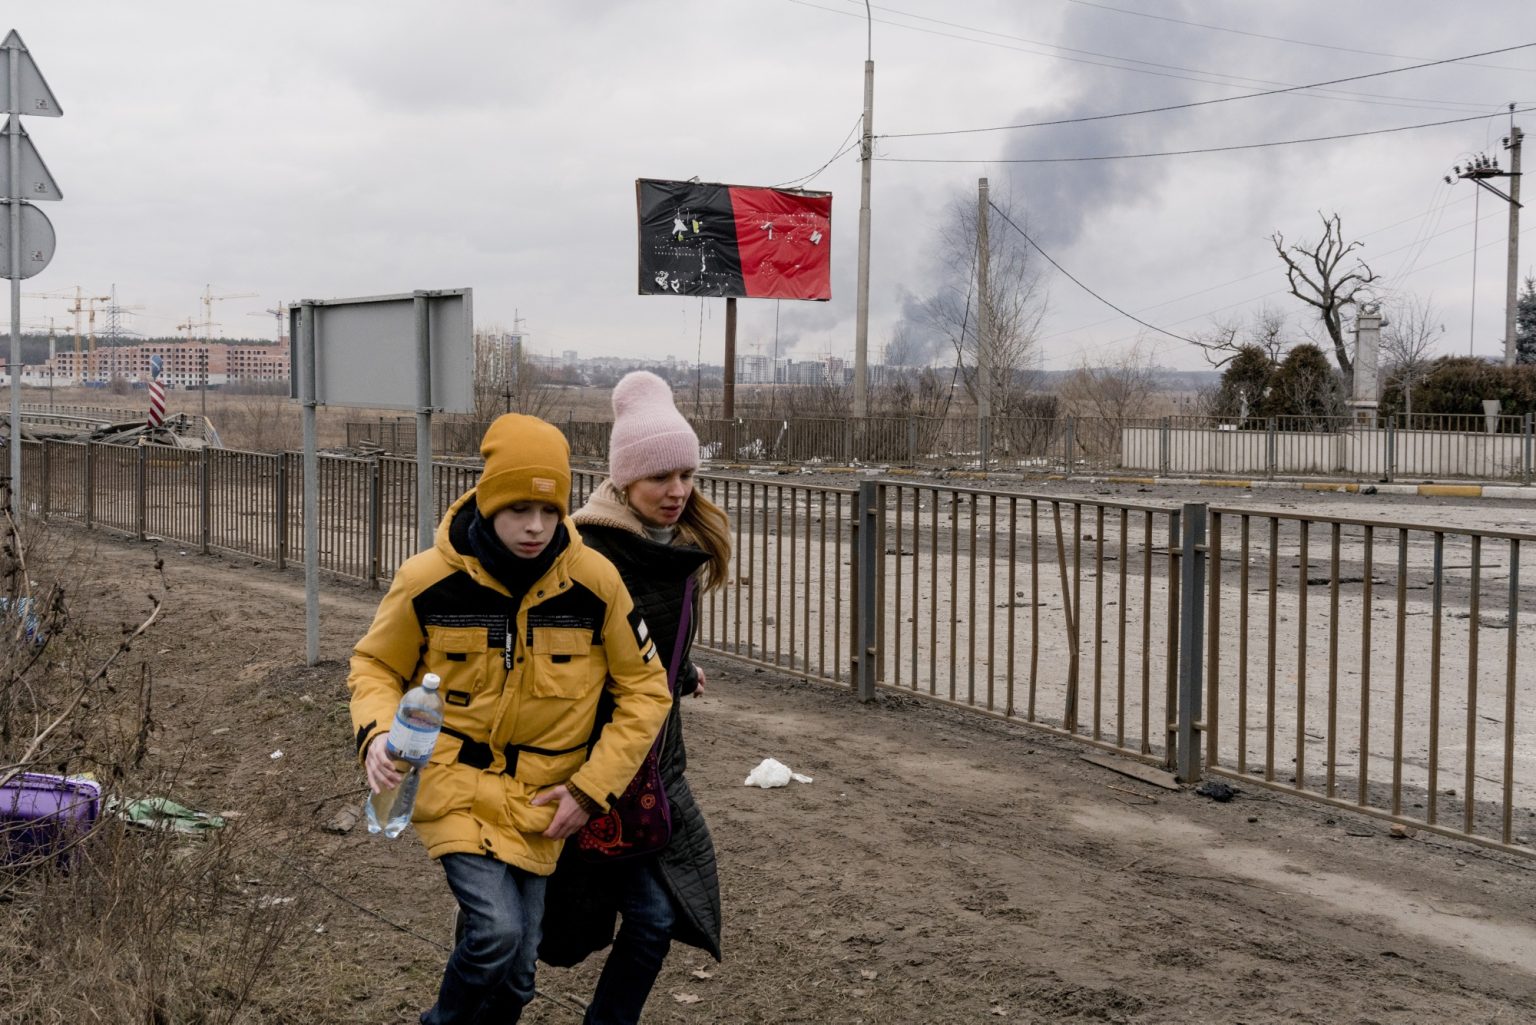 01559190 01557253 UKRAINE, Kyiv. March 06, 2022 - People run to evacuate after crossing a destroyed bridge as they tries to leave the city of Irpin during shelling, in the Kyiv region.           As Russia invades Ukraine, thousands of Ukrainians are fleeing the country to find shelter in bordering countries. 
---------
Con l'invasione russa ai danni dell'Ucraina, migliaia di ucraini sono in fuga dalla nazione d'origine per cercare rifugio nelle nazioni confinanti.*** SPECIAL   FEE   APPLIES ****** SPECIAL   FEE   APPLIES *** *** Local Caption *** 01559190